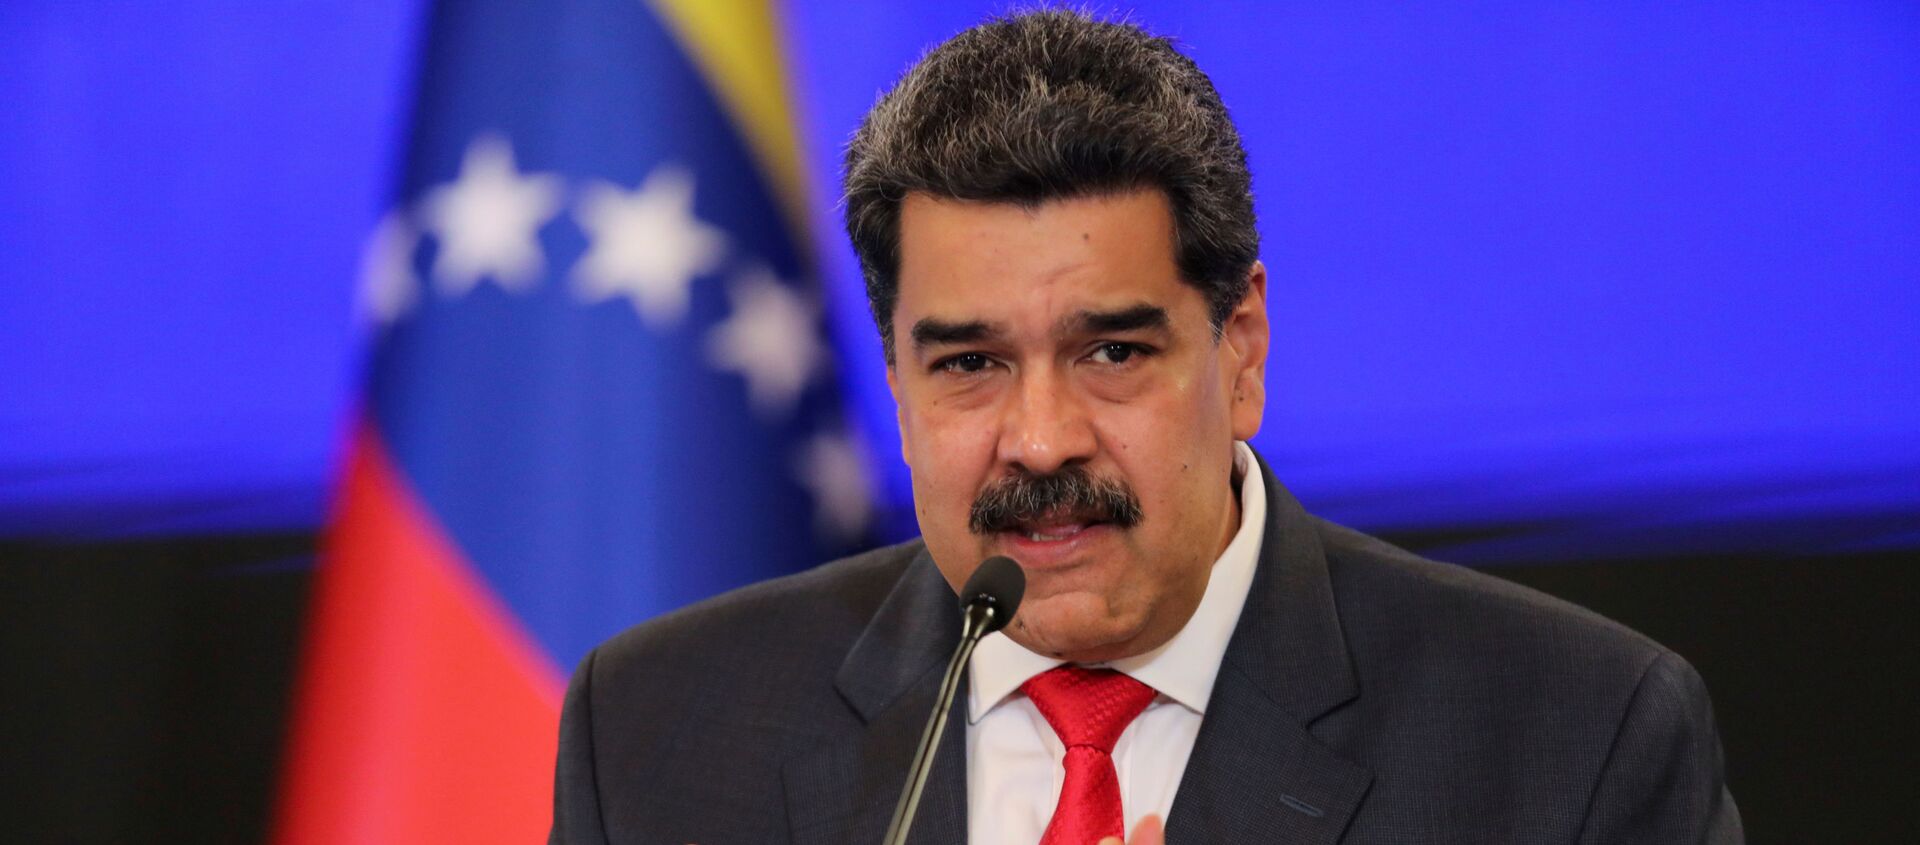 Venezuelan President Nicolas Maduro gestures as he speaks during a news conference following the ruling Socialist Party's victory in legislative elections that were boycotted by the opposition in Caracas, Venezuela December 8, 2020. - Sputnik International, 1920, 01.02.2021